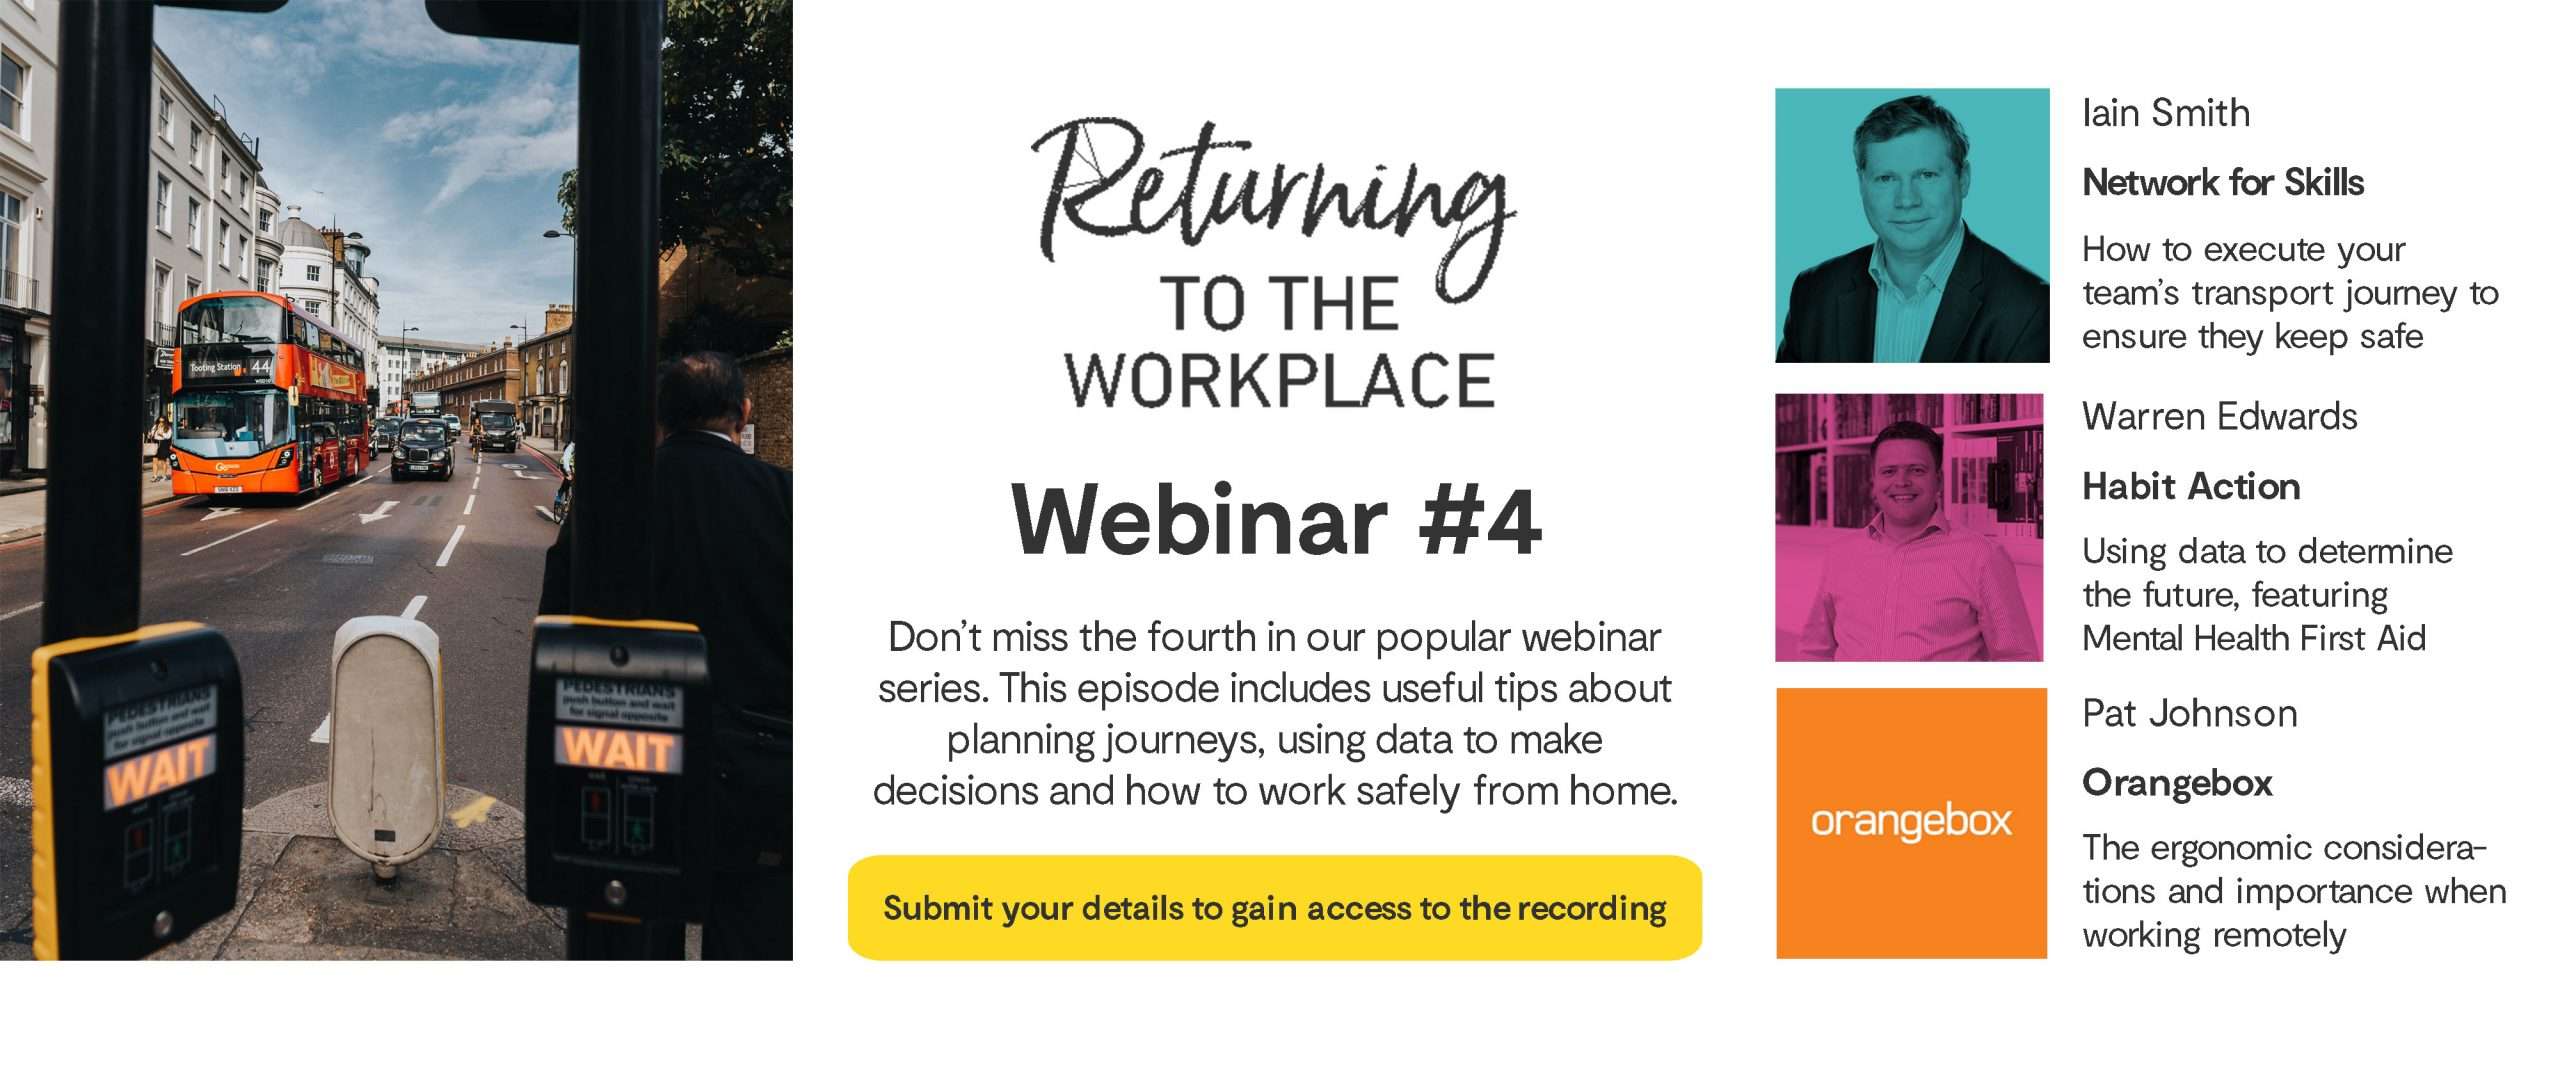 Returning To The Workplace Webinar #4 -12:30 GMT Friday 15th May 2020